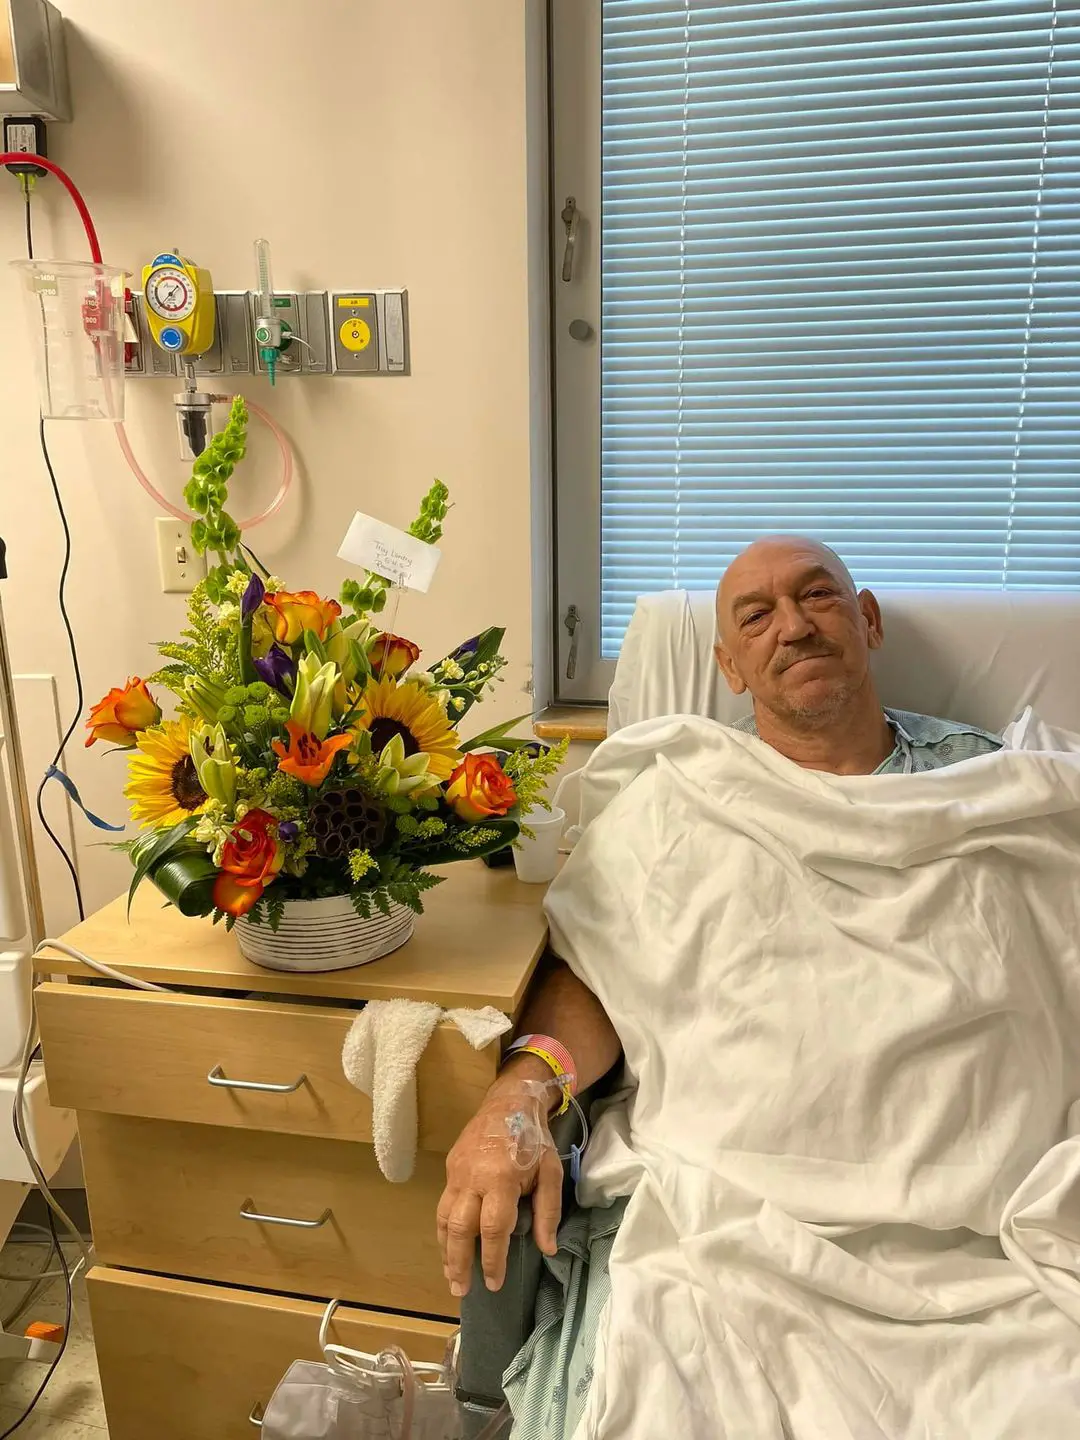 Image of Troy Landry on hospital bed after Prostate Surgery